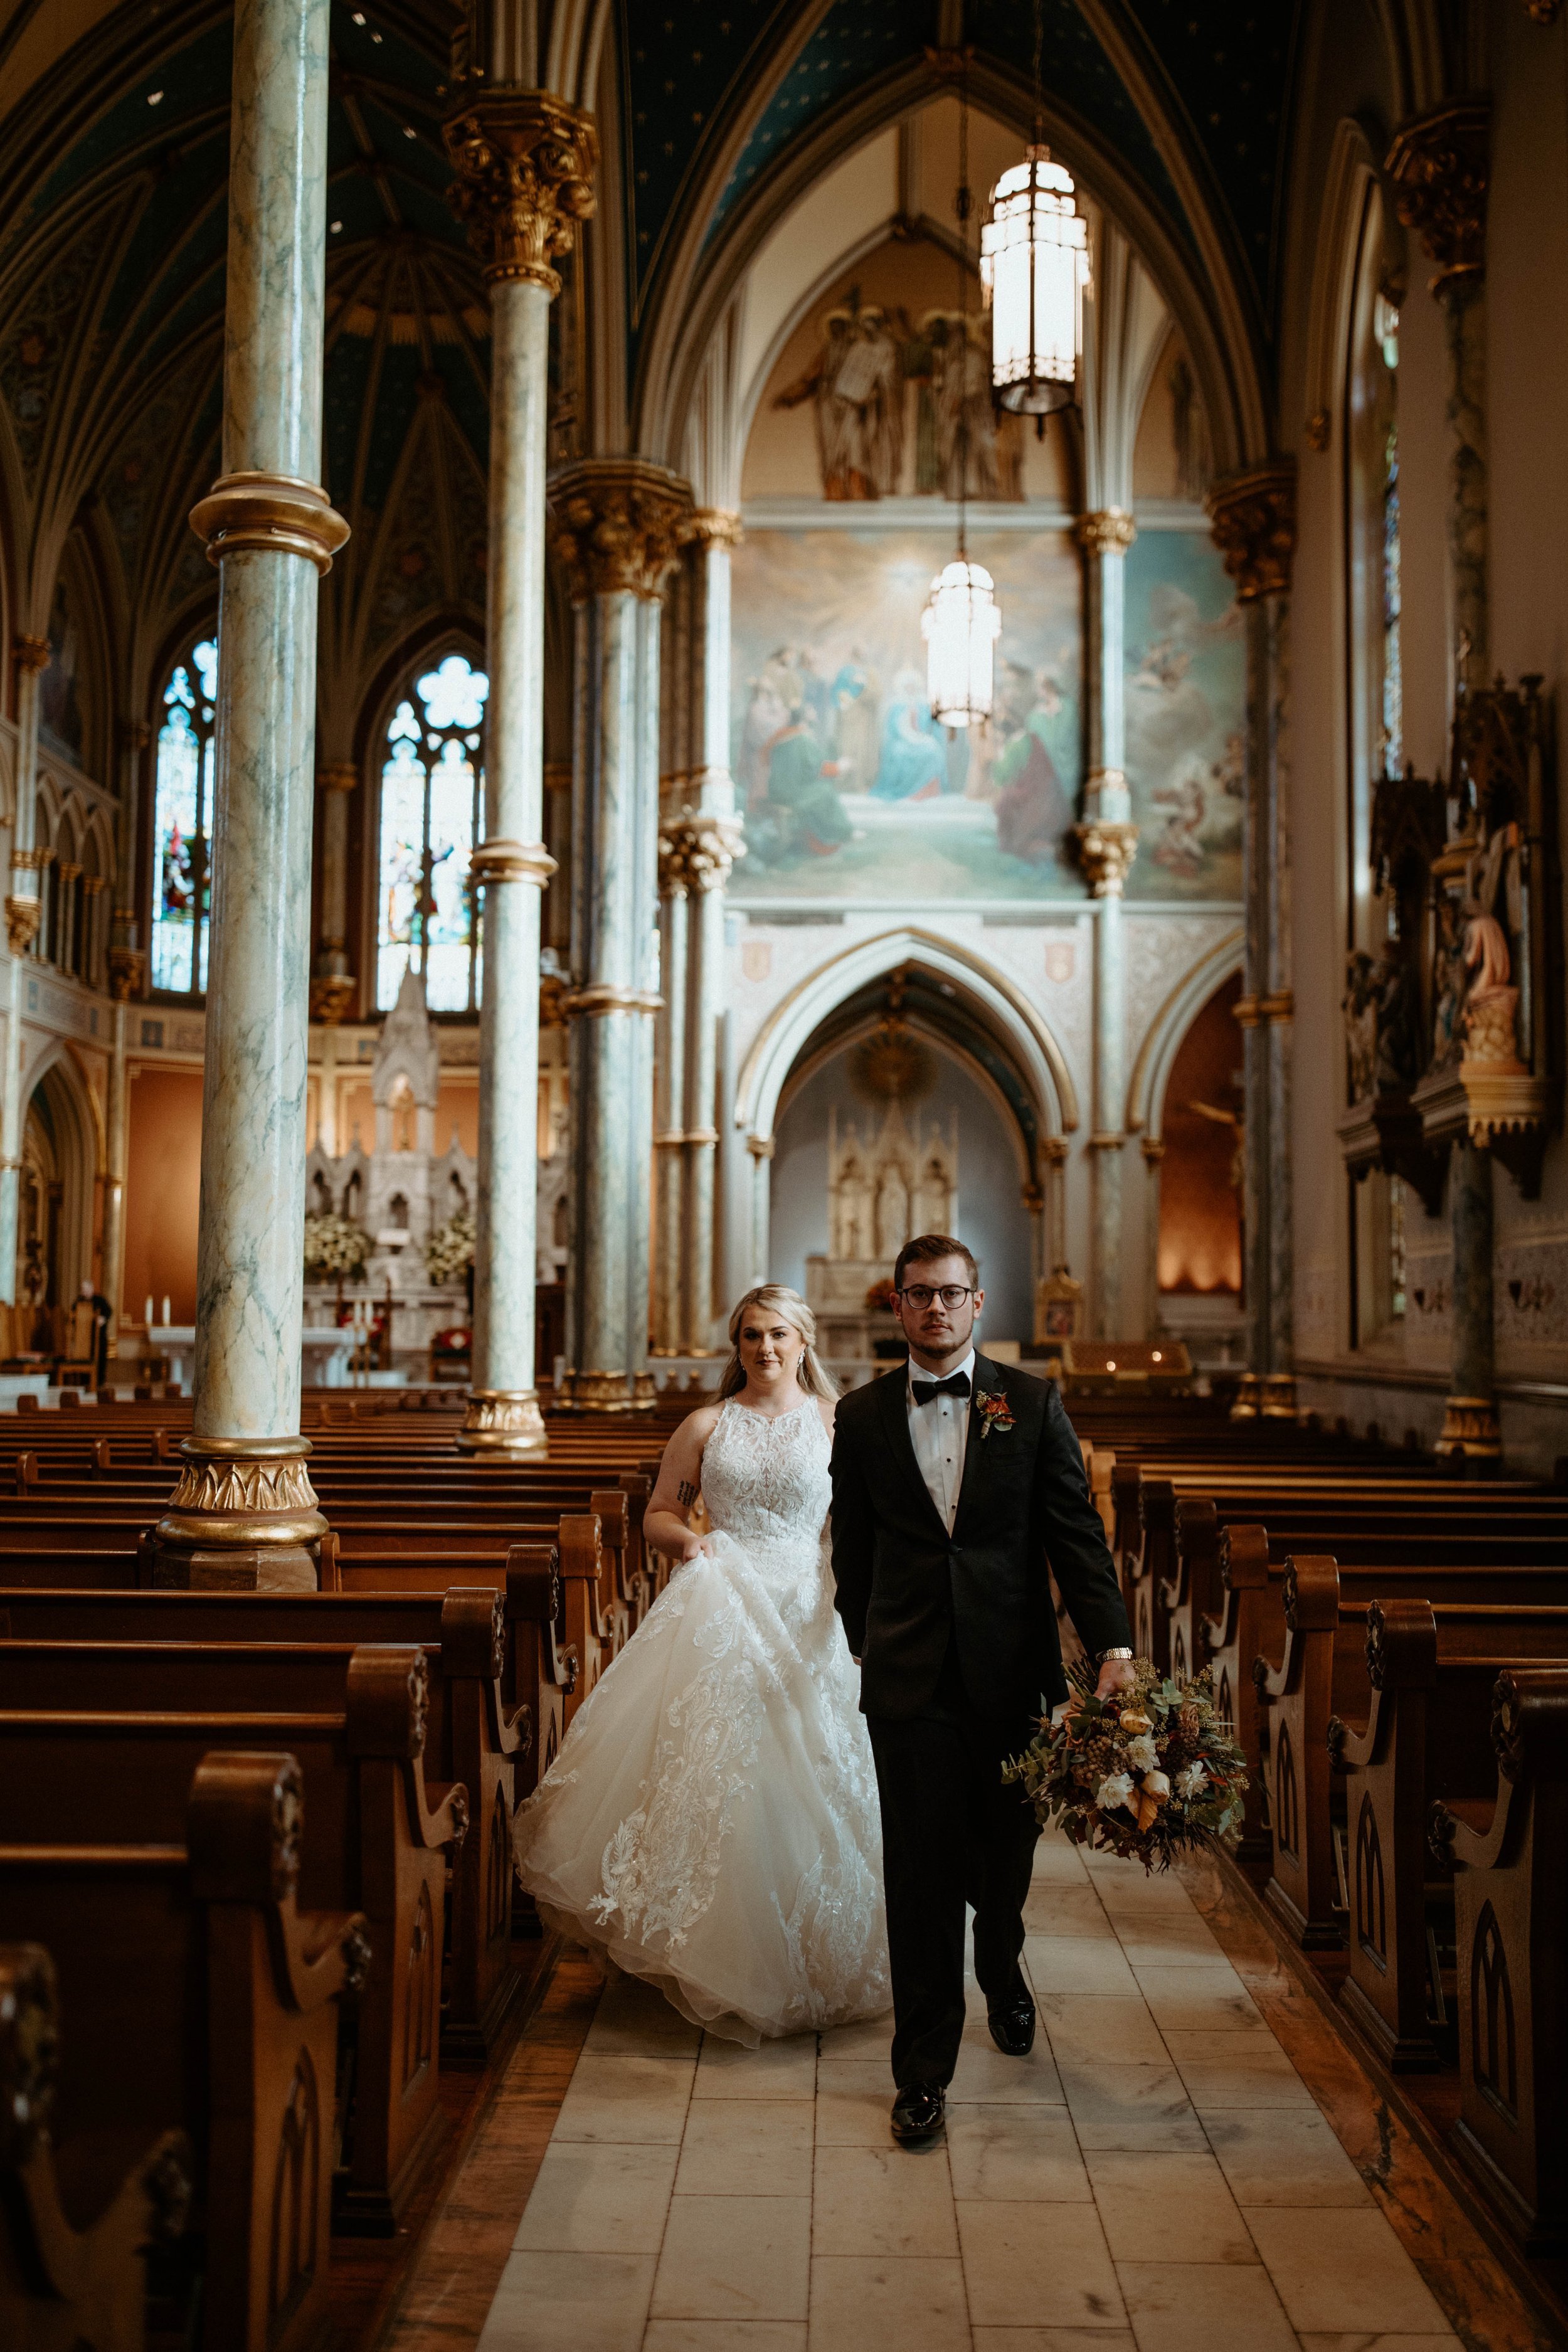 Ivory-and-beau-bride-ansley-bought-sparkly-and-traditional-highneck-ballgown-at-savannah-bridal-shop-gets-married-at-cathedral-with-the-help-of-ivory-and-beau-who-created-floral-peices-for-the-ceremony-and-reception-in-their-savannah-florwer-shop-1.jpg